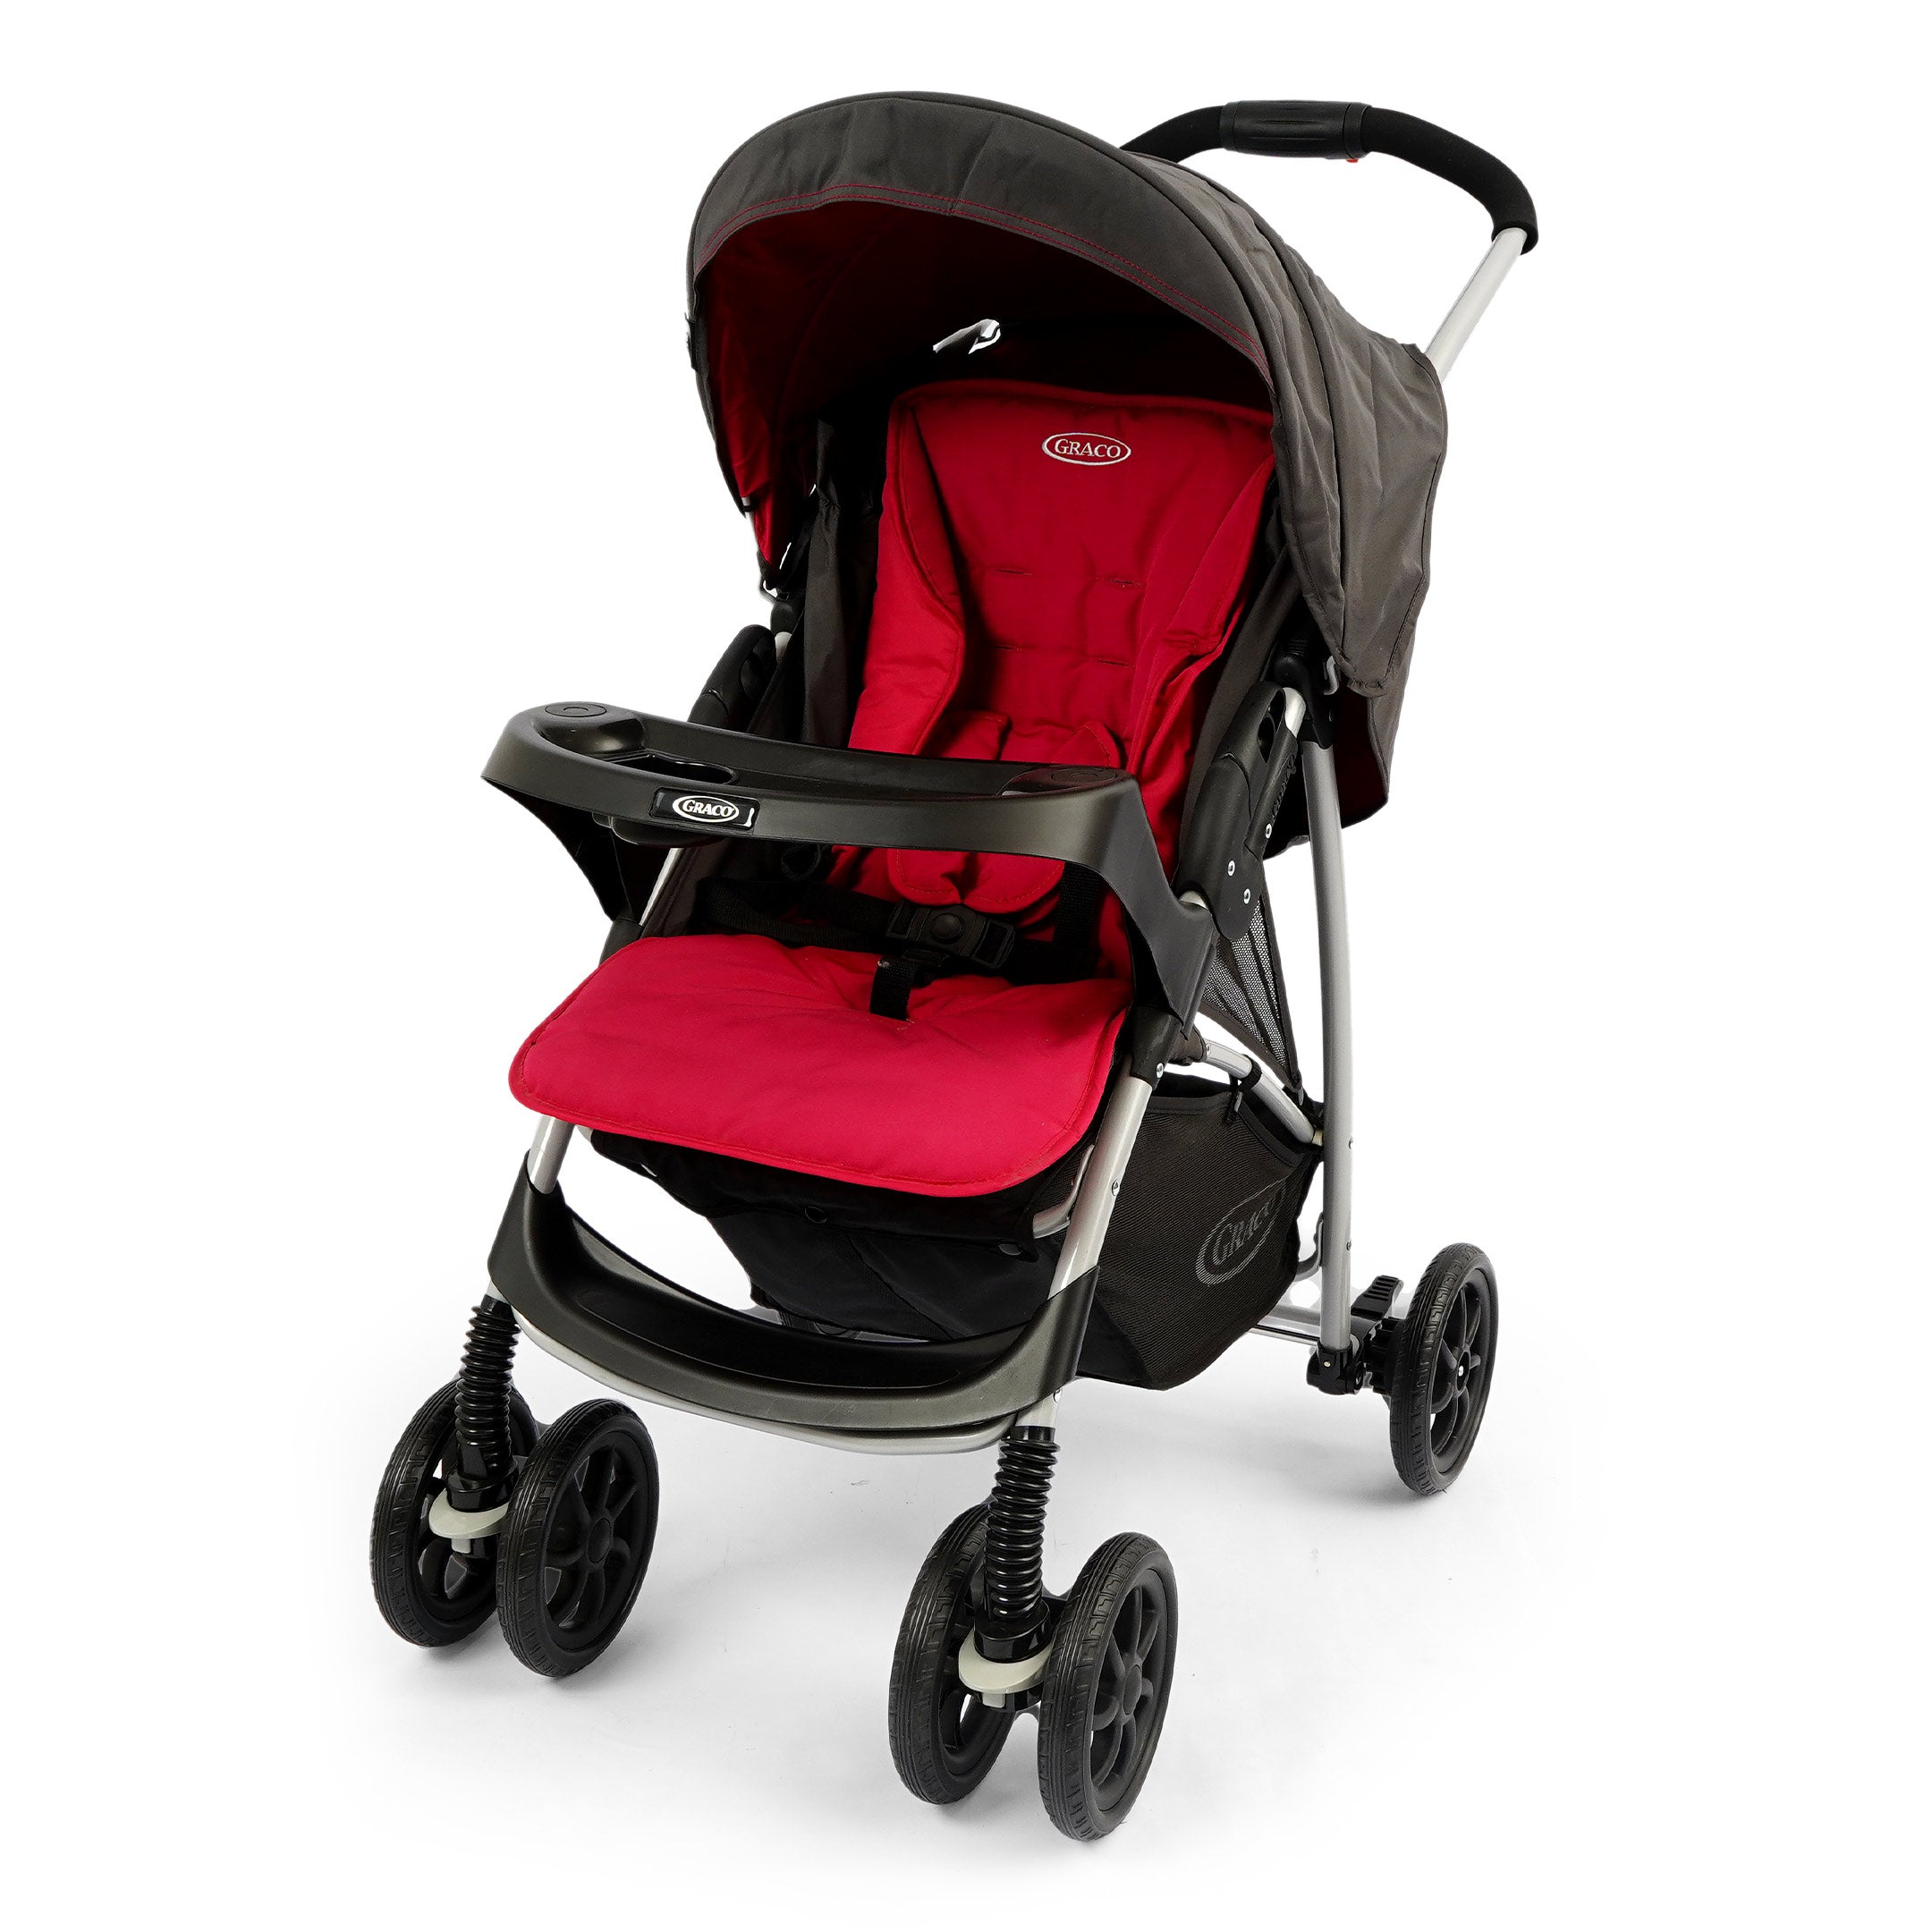 GRACO Graco Mirage Plus Stroller - Red